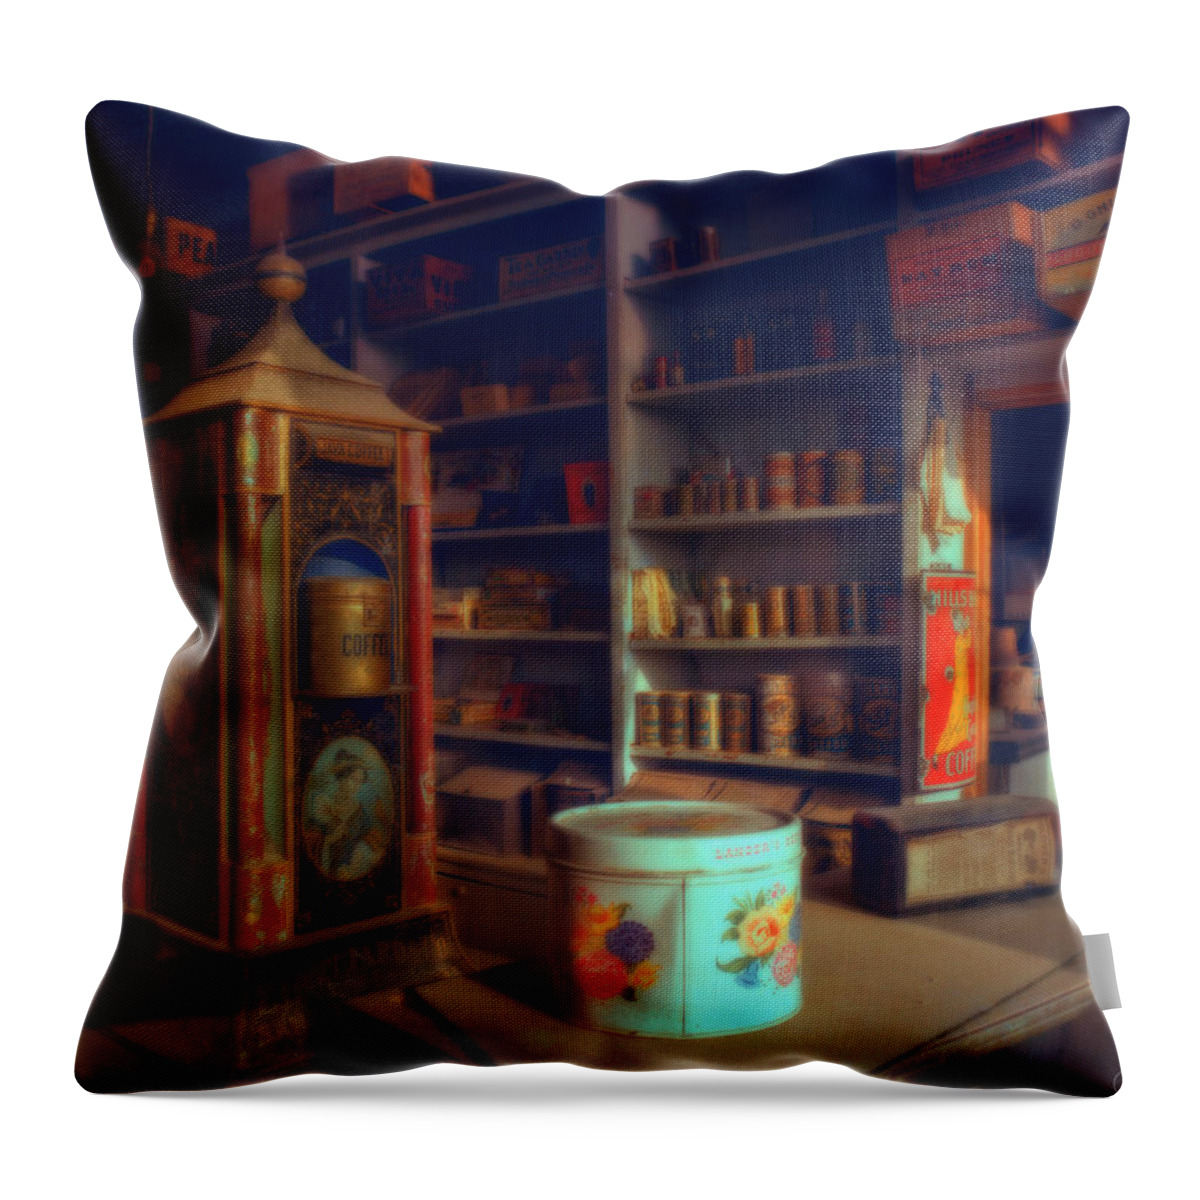 General Stores Throw Pillow featuring the photograph General Store for Canvas by Lar Matre